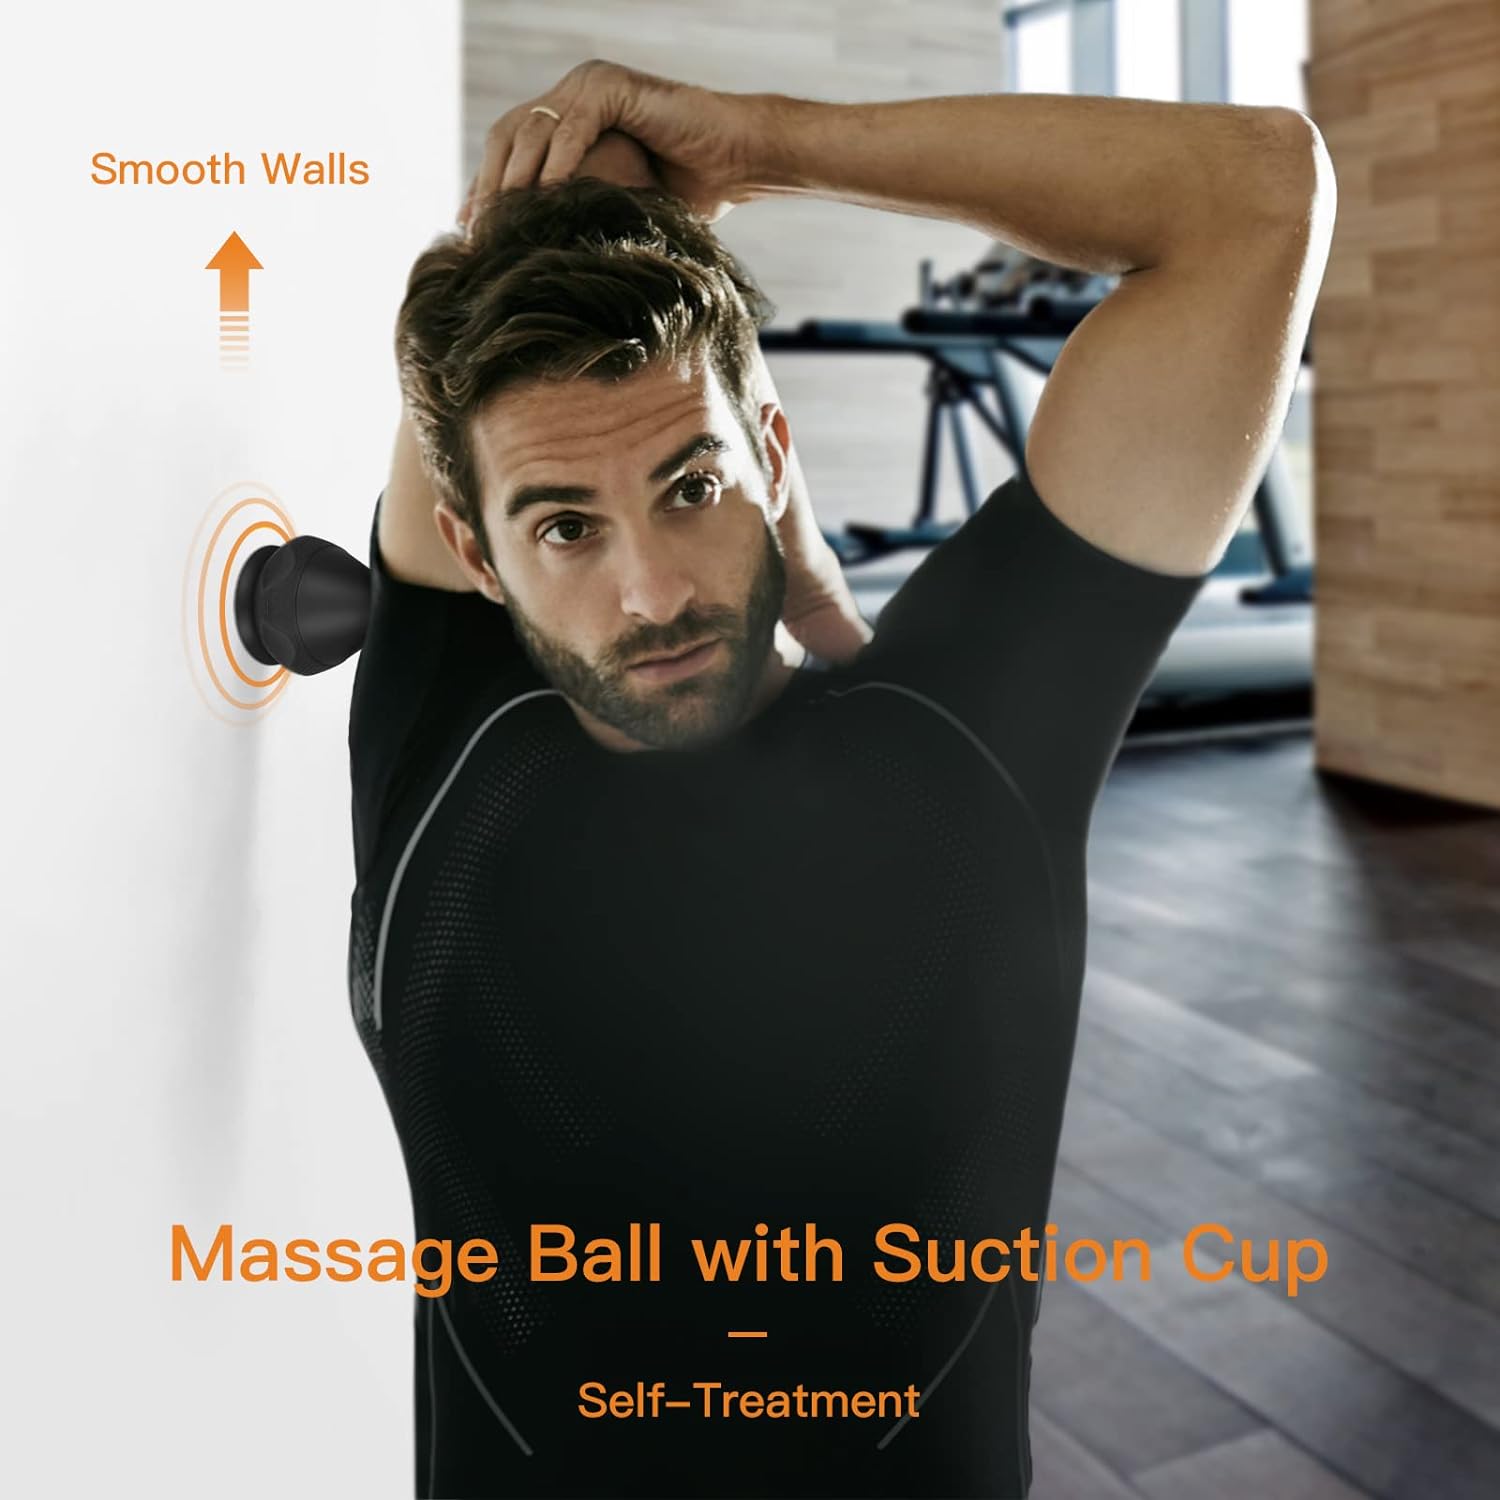 Trigger Point Massager Ball Deep Tissue, AOT Manual Massage Balls Kit to Relieve Muscle Pain and Tension in The Back, Neck, arms, Shoulders and Legs Black